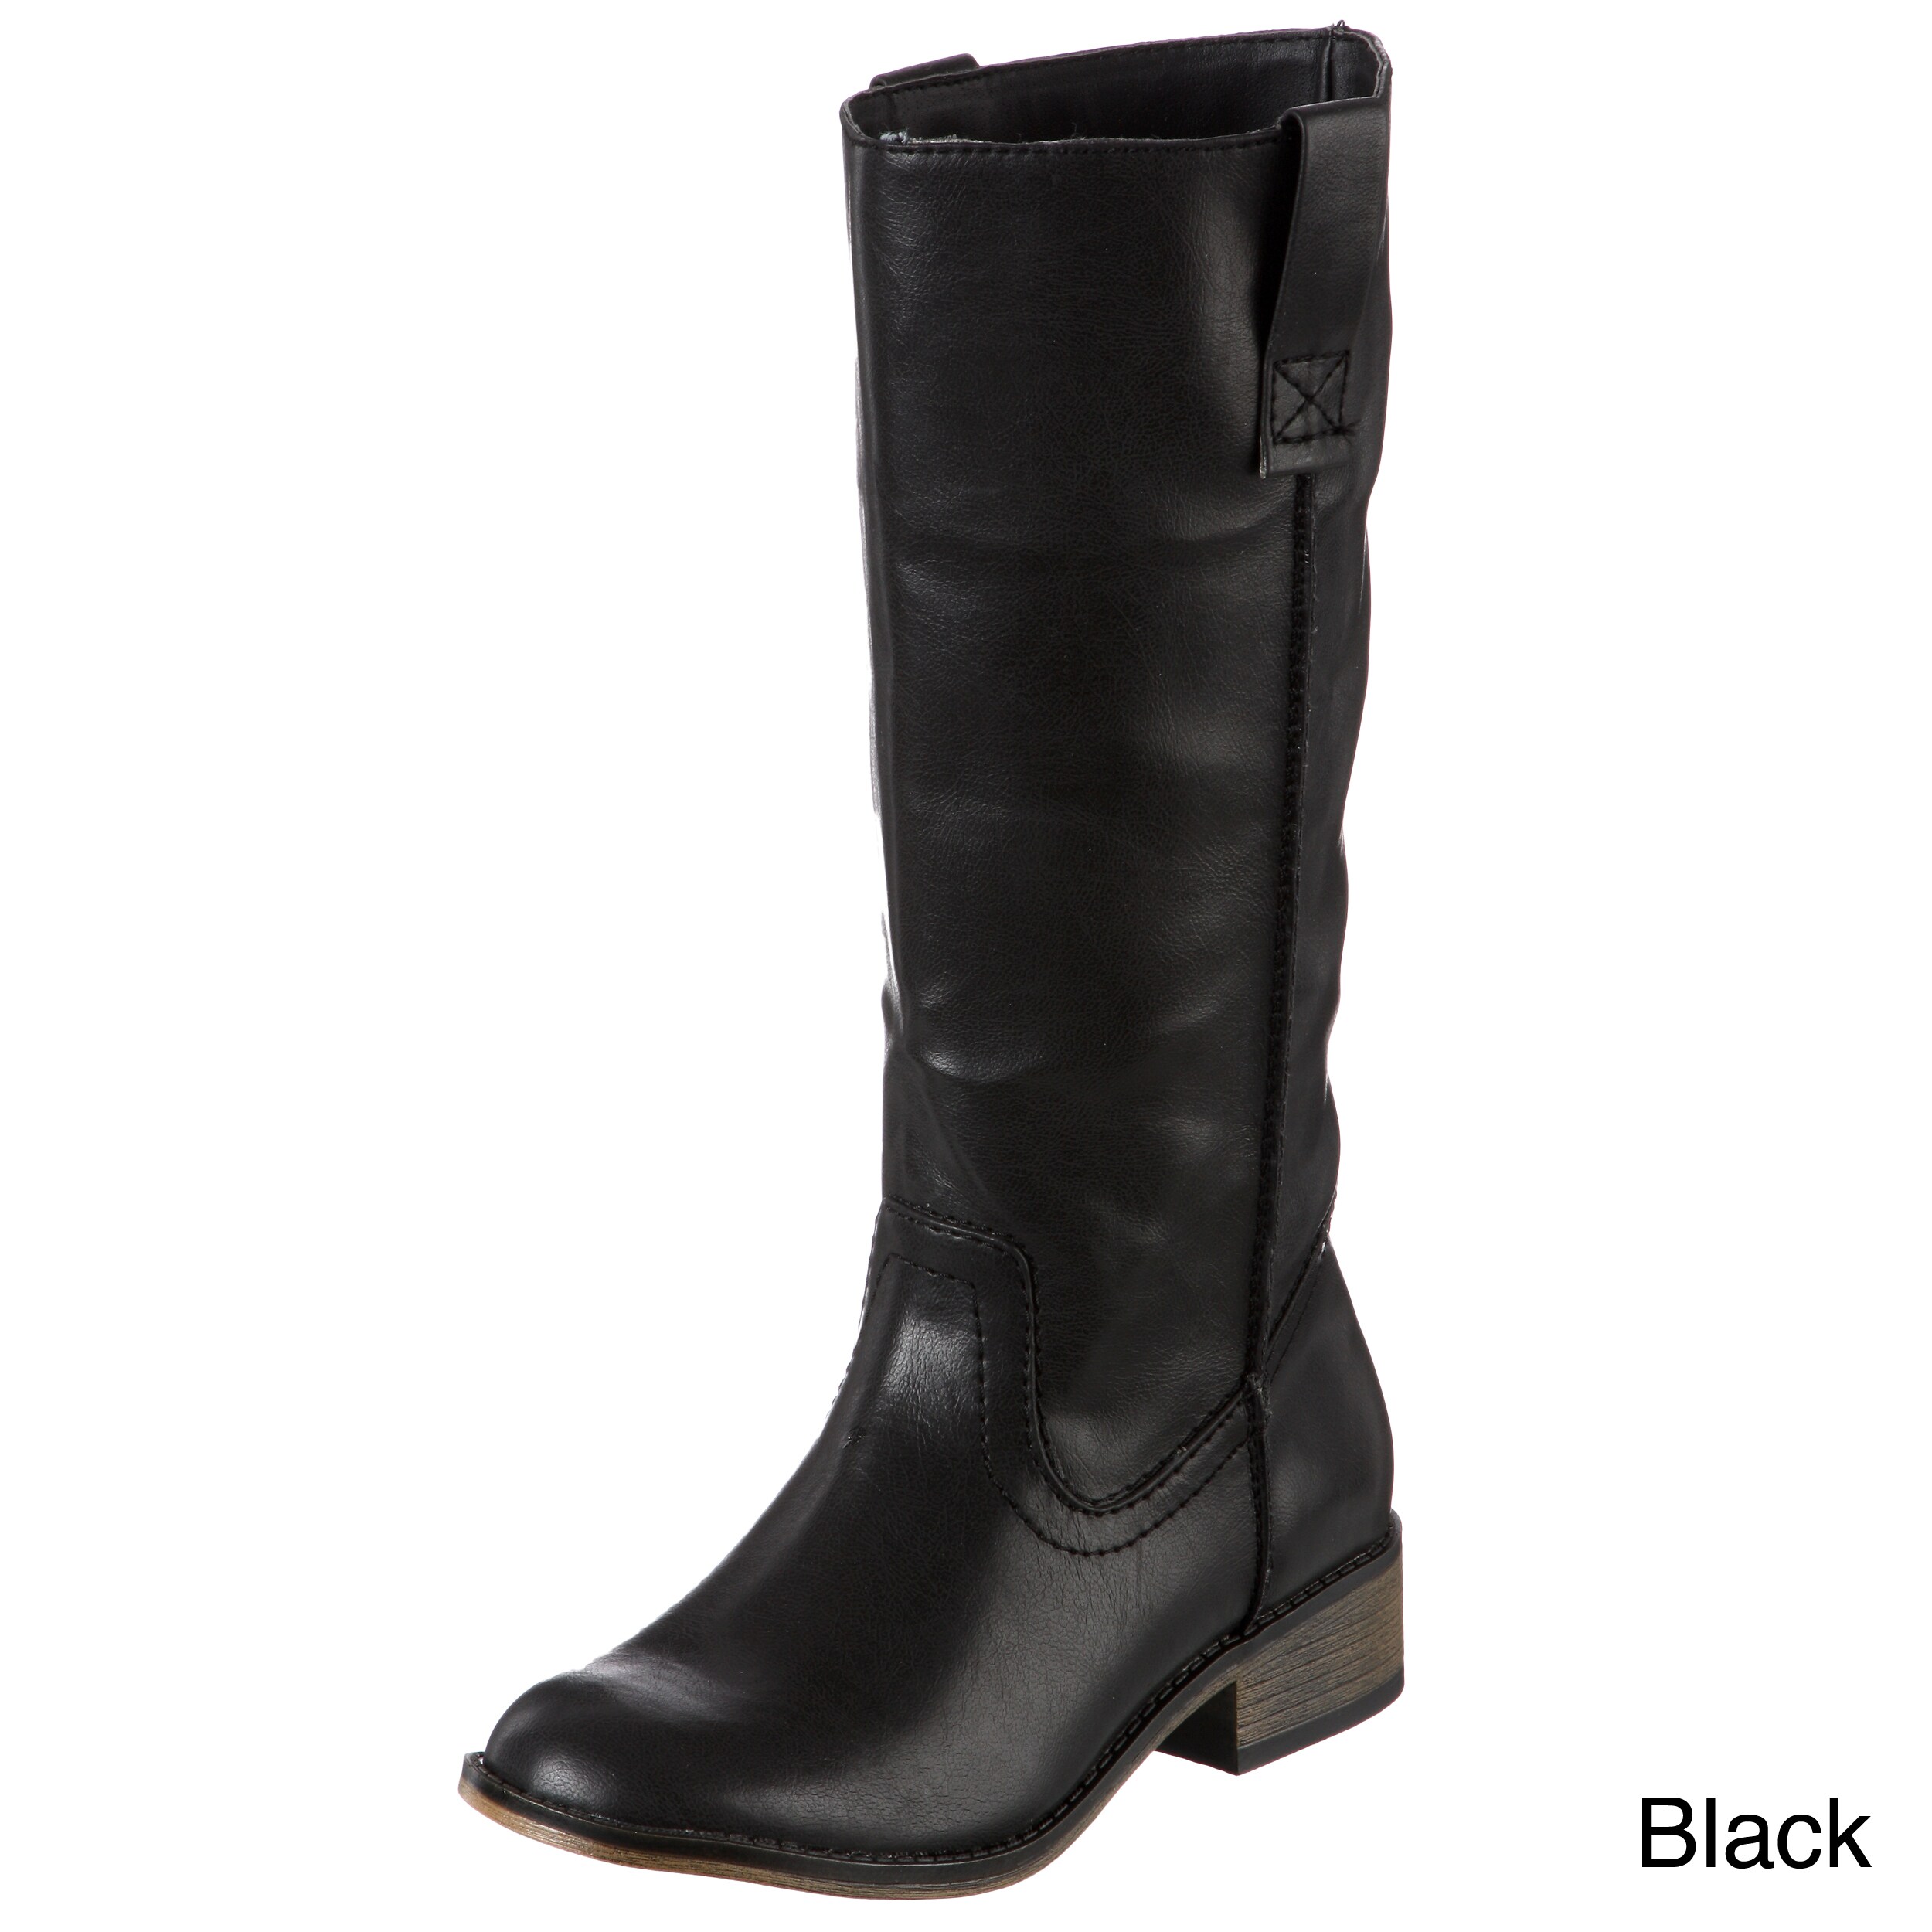 Alley' Mid-calf Boots FINAL SALE 